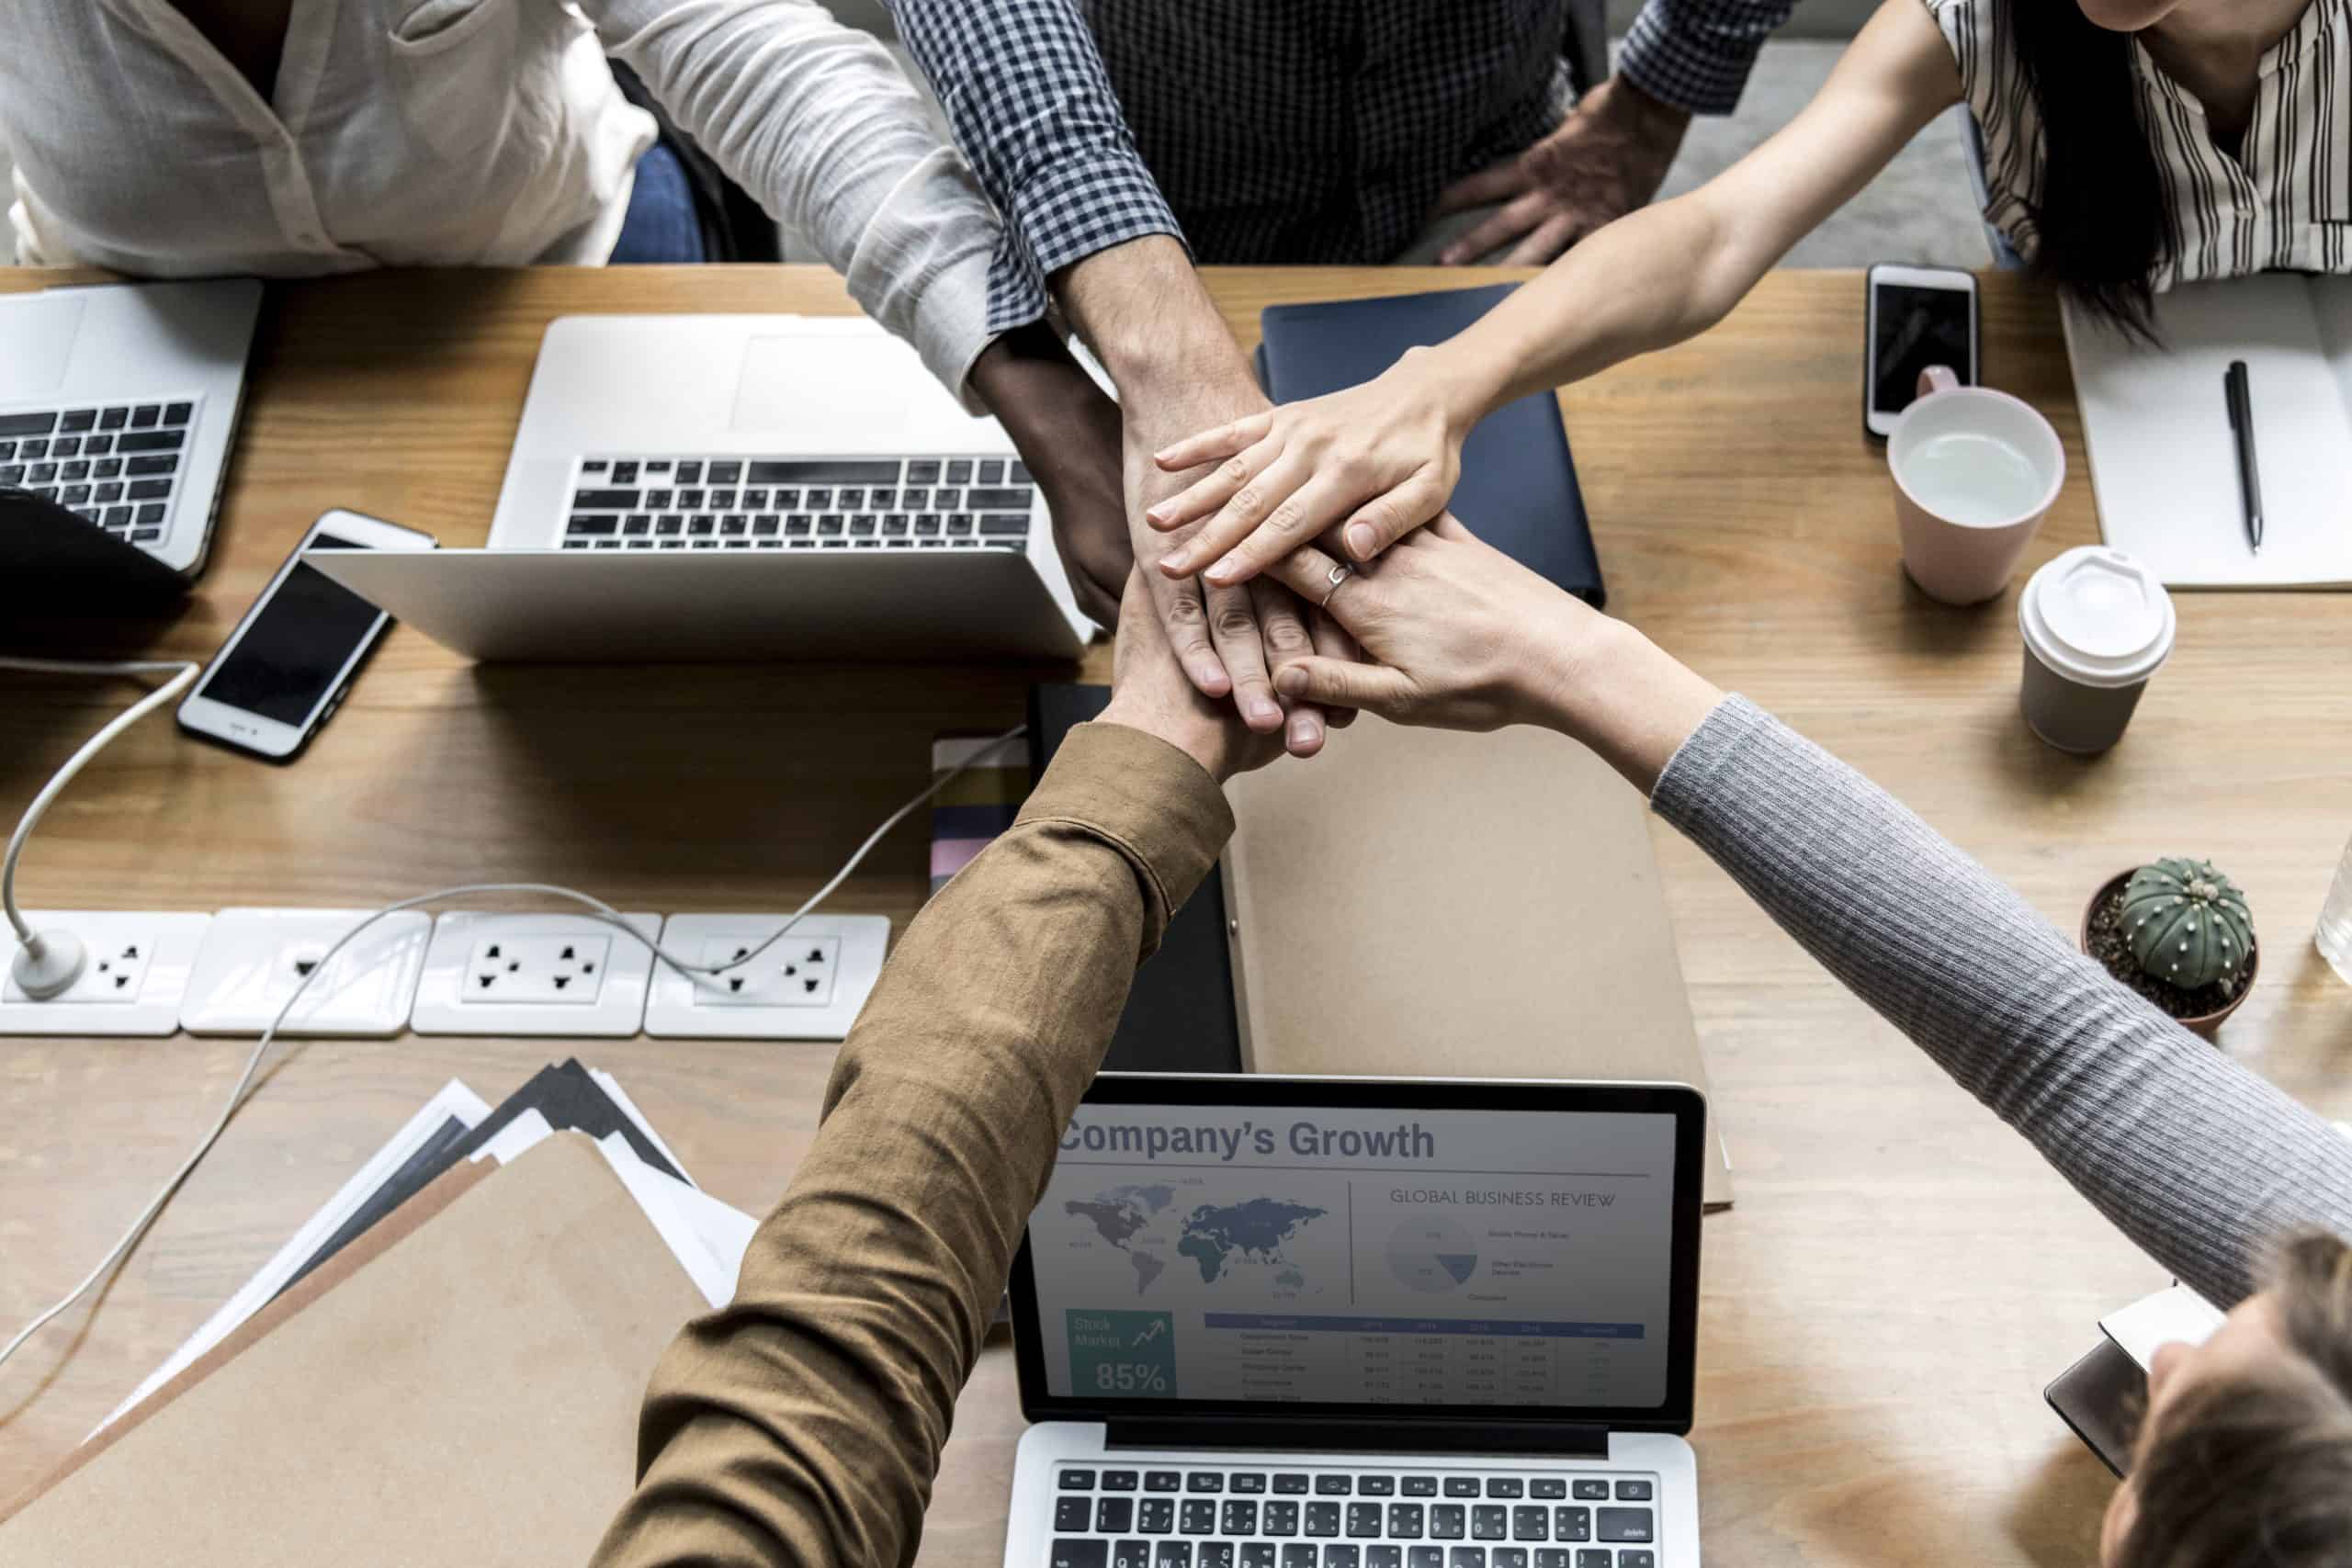 A unified team of business people stacking hands, symbolizing Edgeworks Solutions' mission to build an edge through strong partnerships, community involvement, and a dedicated staff.